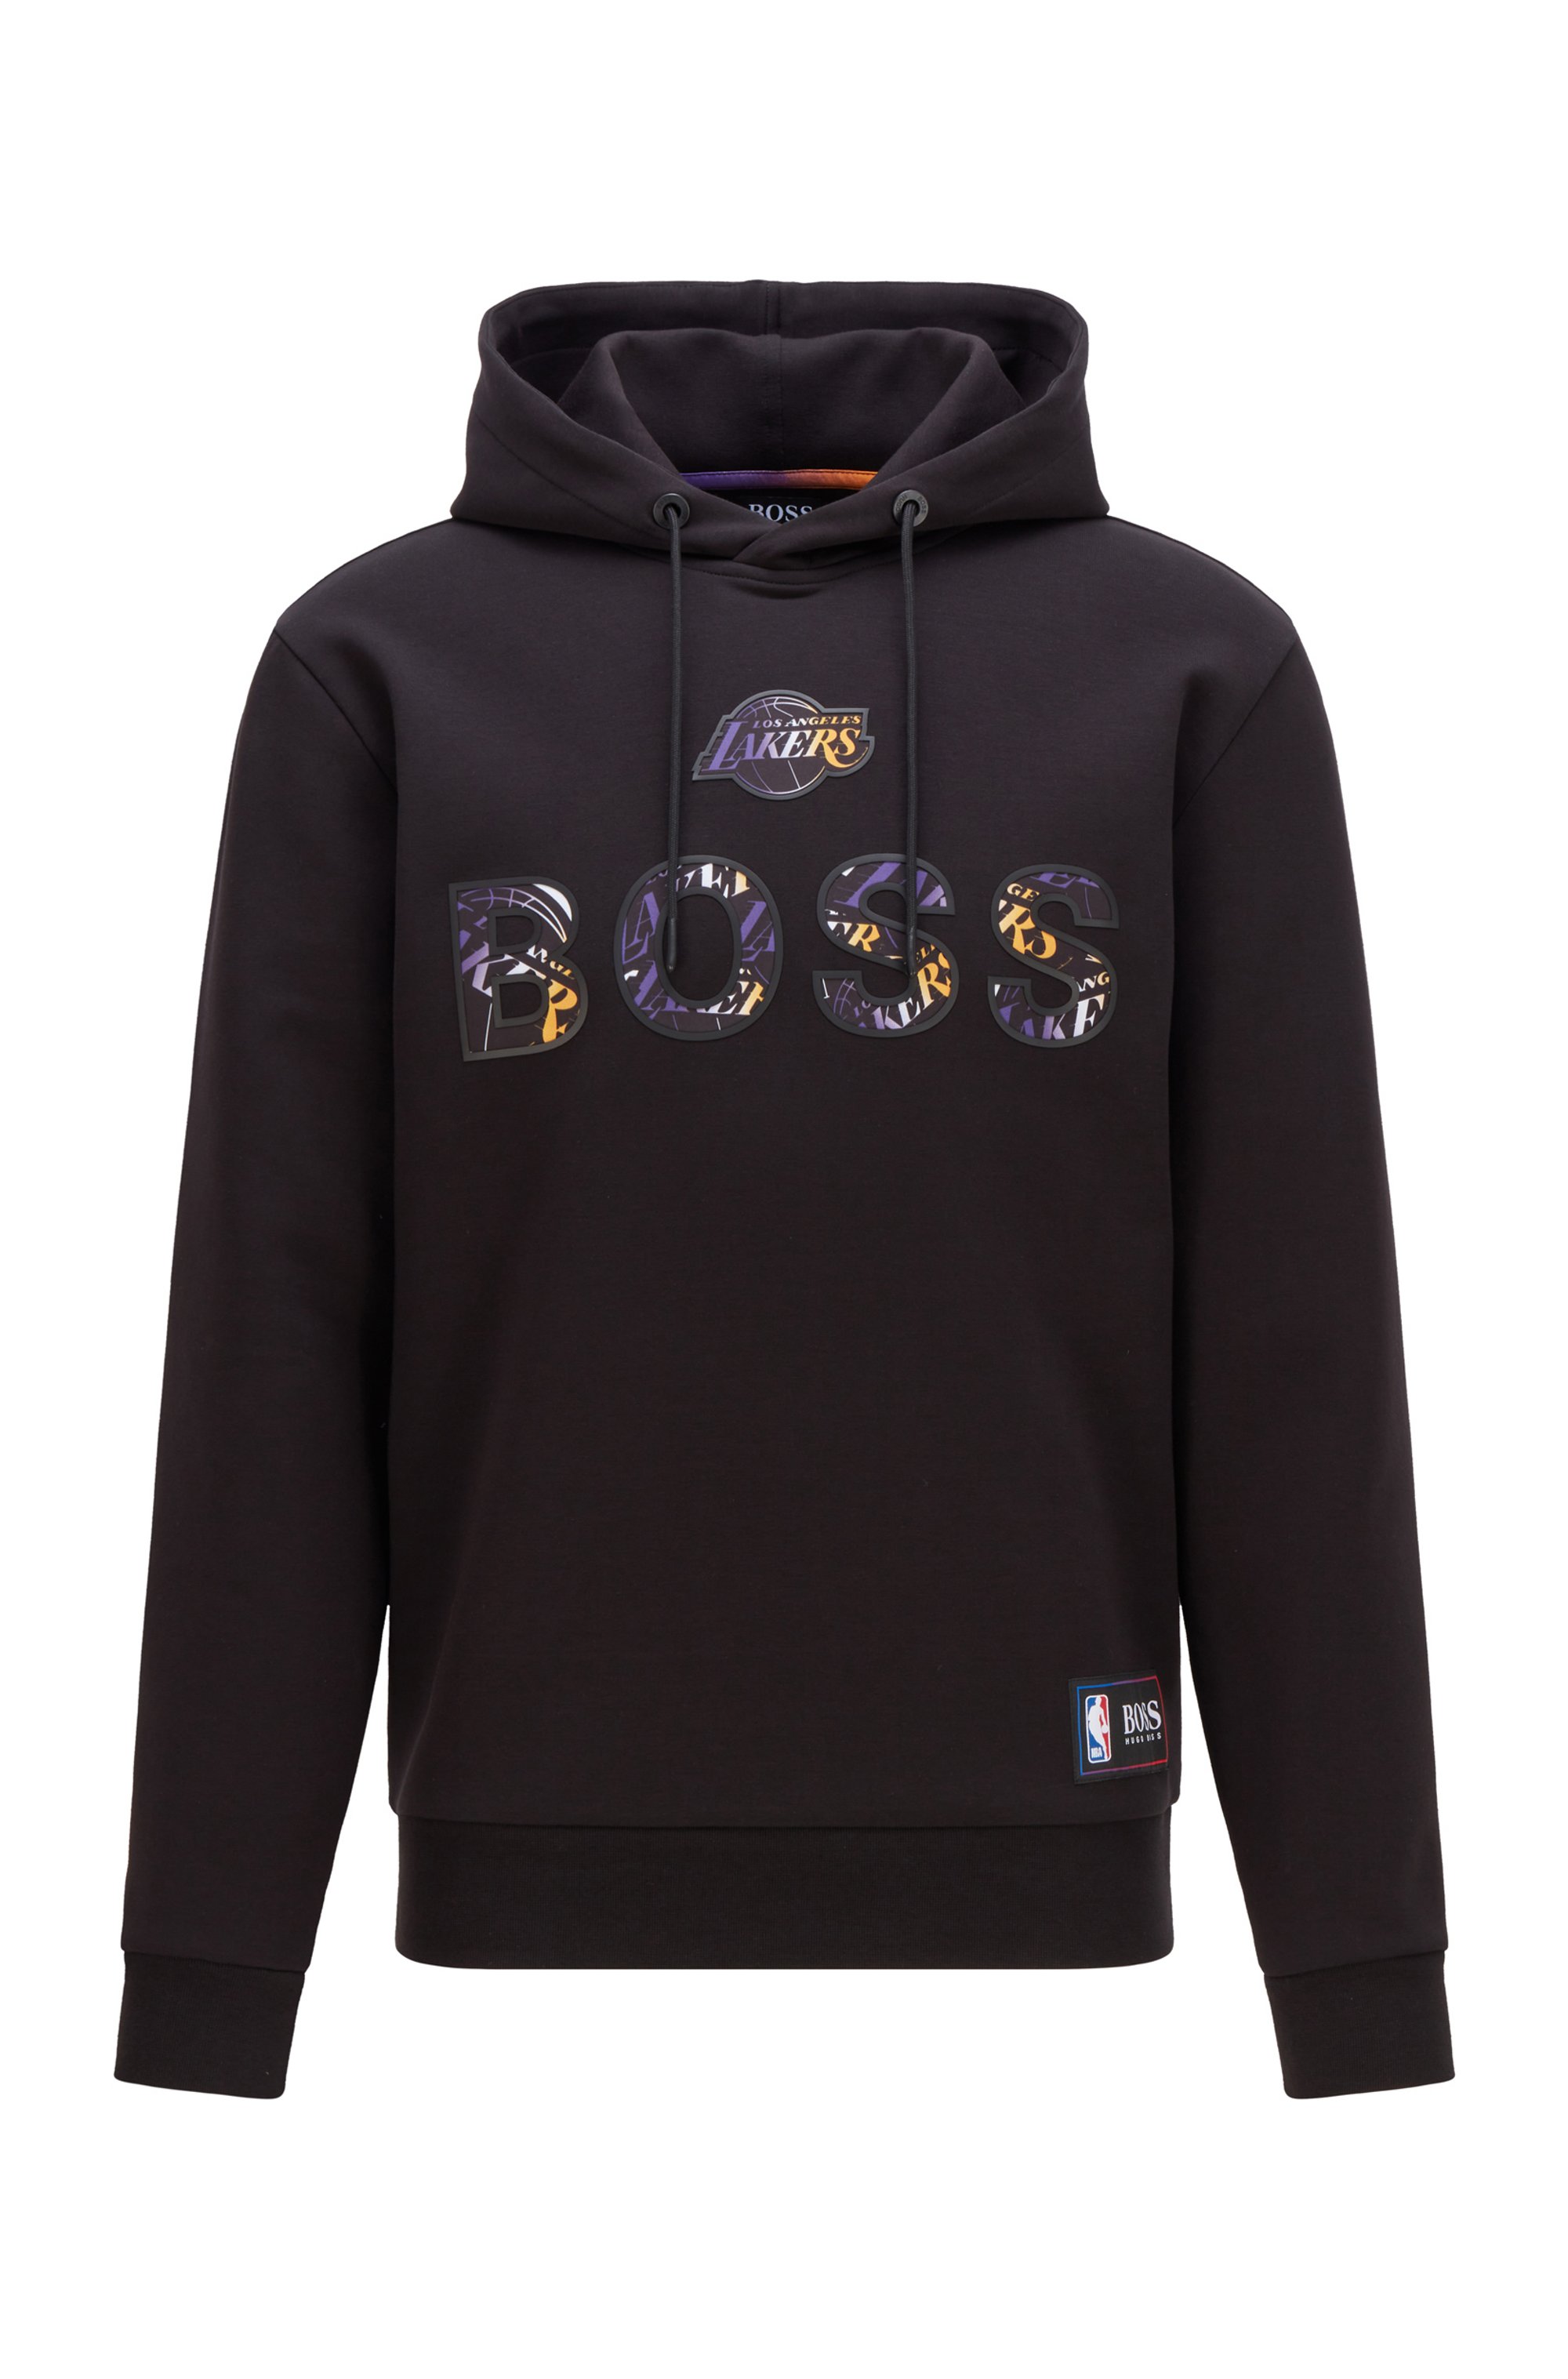 BOSS x NBA cotton-blend hoodie with colorful branding, NBA Lakers